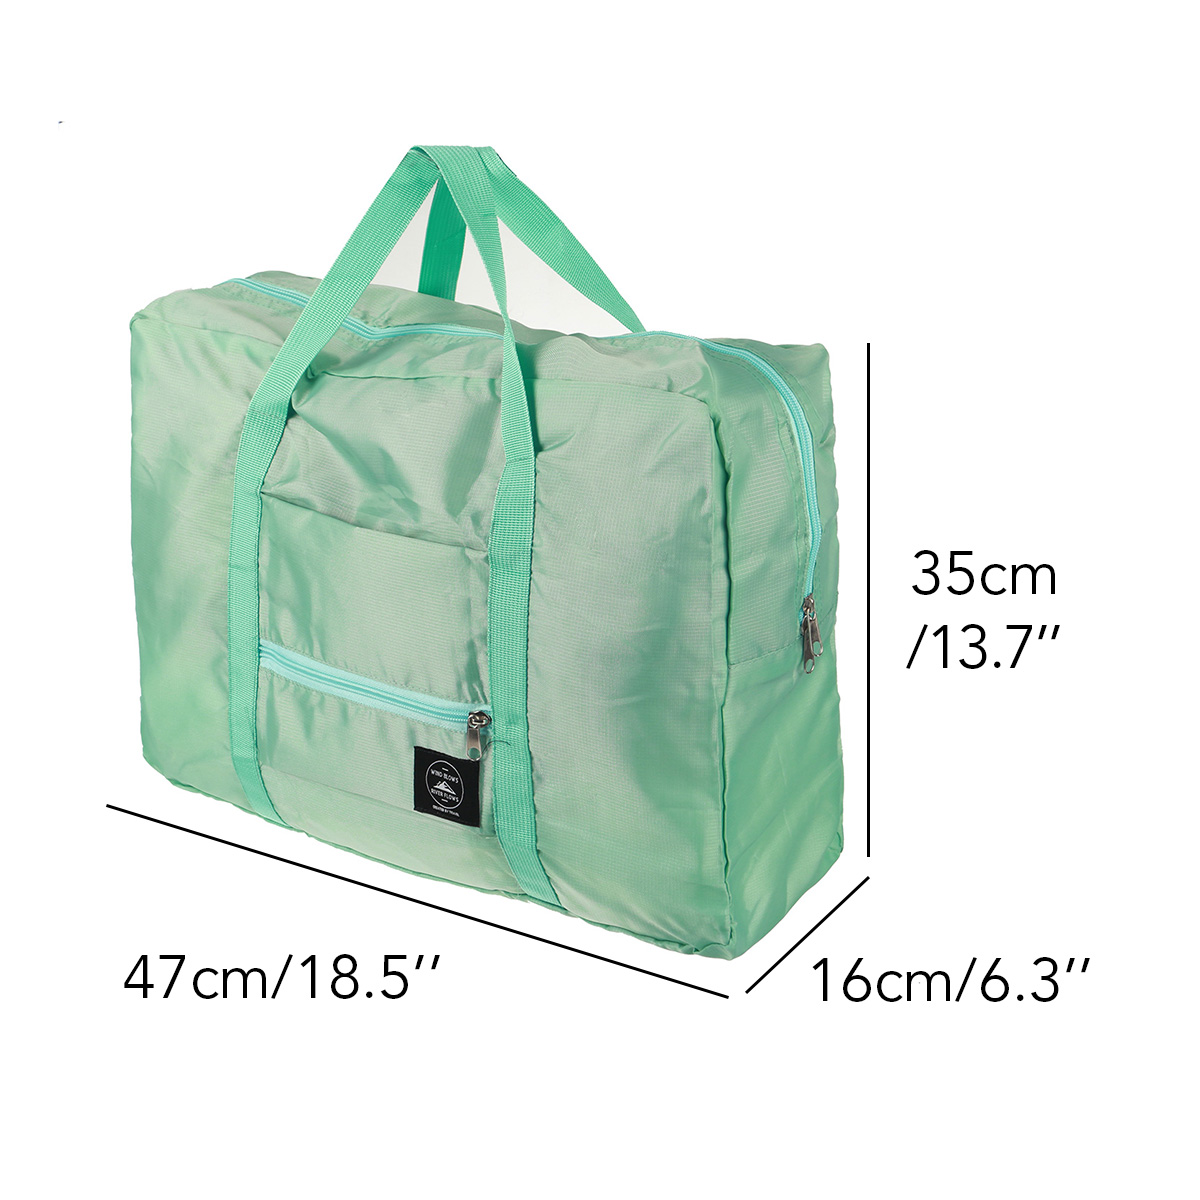 420D-Waterpoof-Folding-Travel-Luggage-Storage-Bags-Portable-Outdoor-Camping-Carry-On-Duffle-Bag-1790767-10